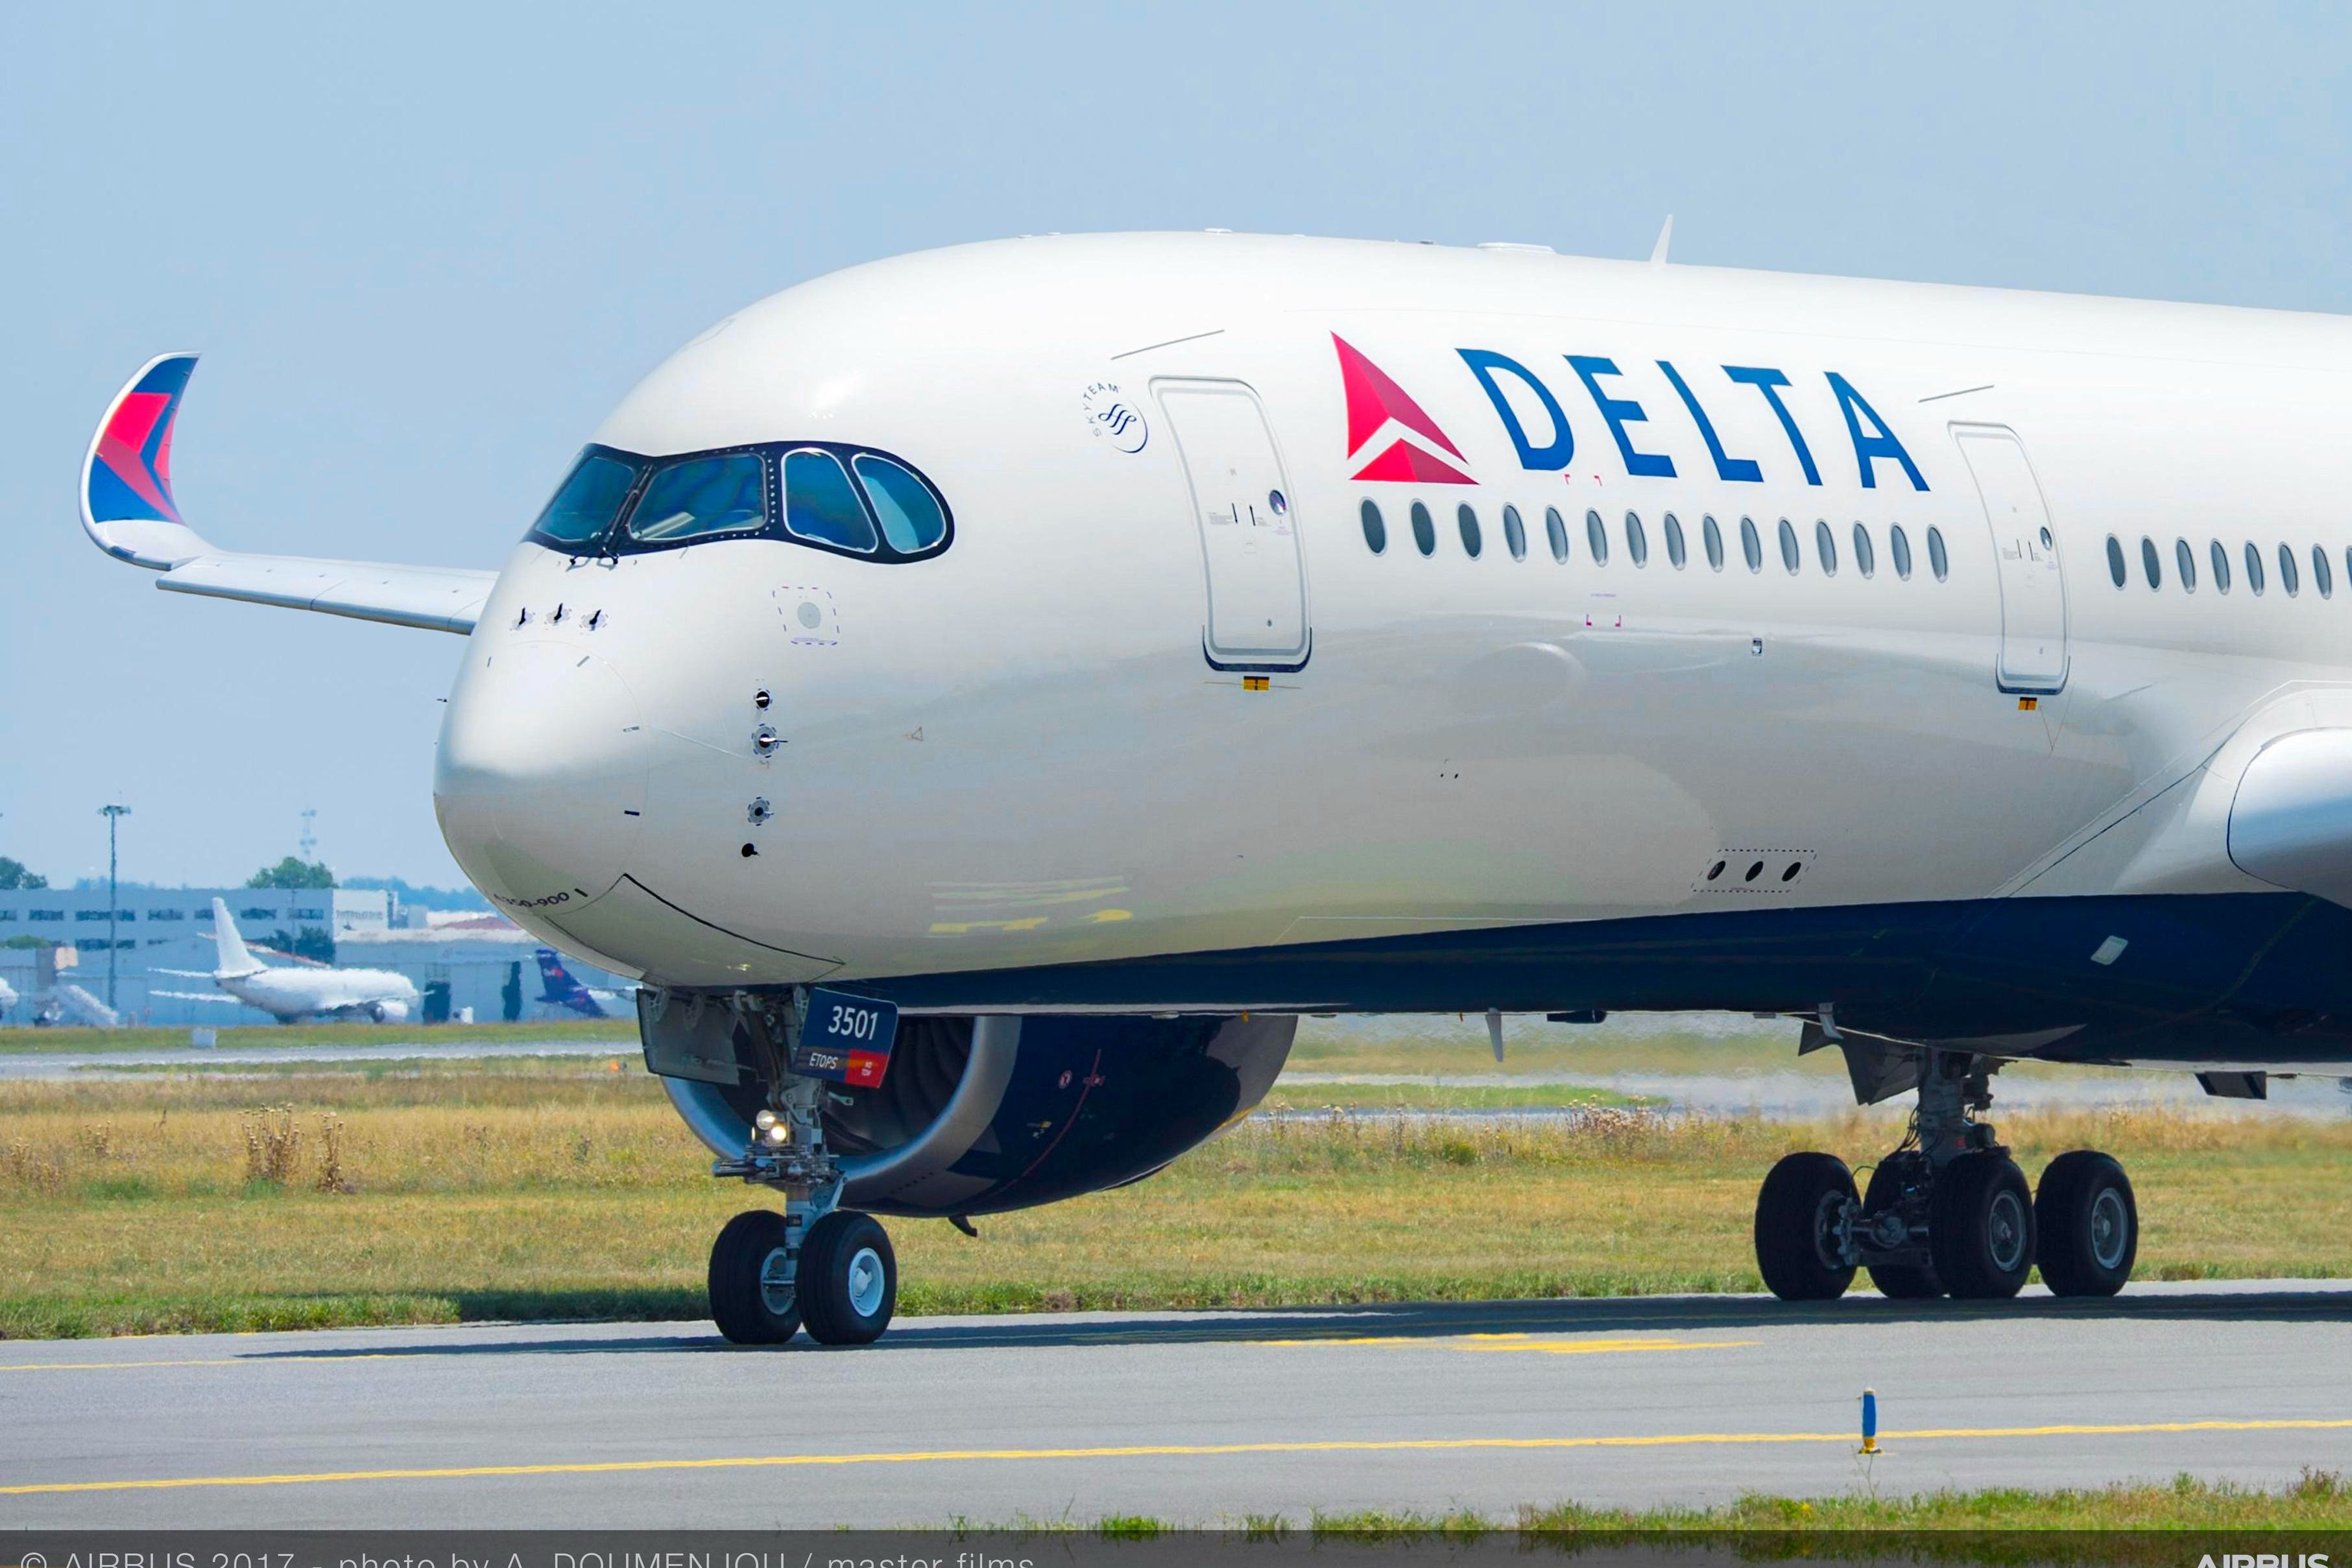 A Delta Air Lines A350-900 on an airport apron.